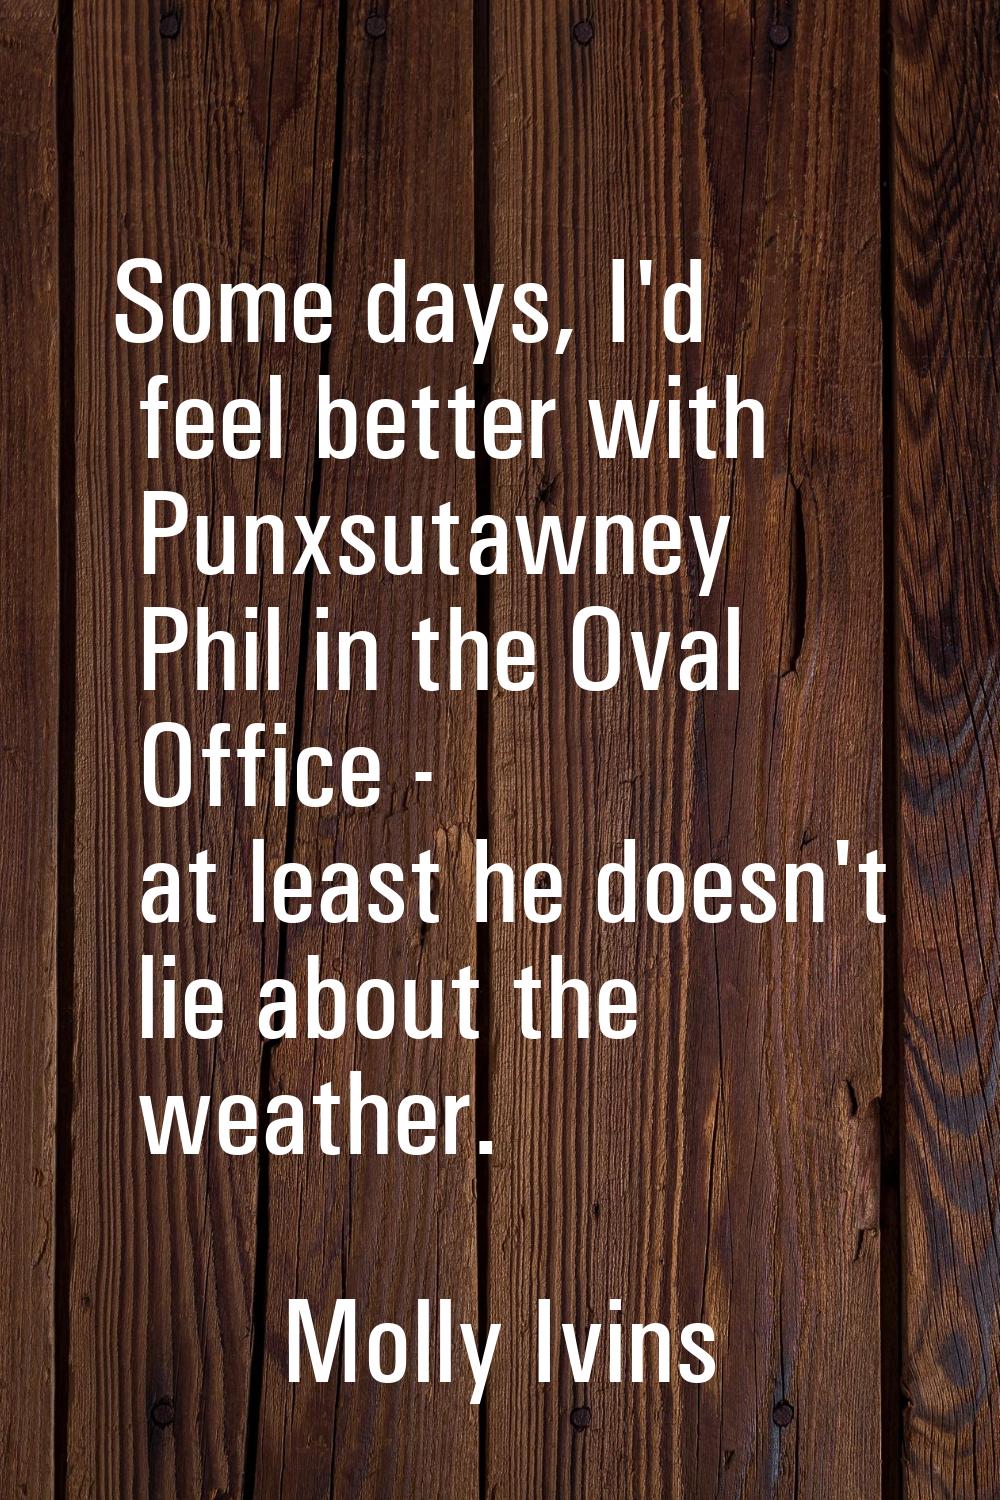 Some days, I'd feel better with Punxsutawney Phil in the Oval Office - at least he doesn't lie abou